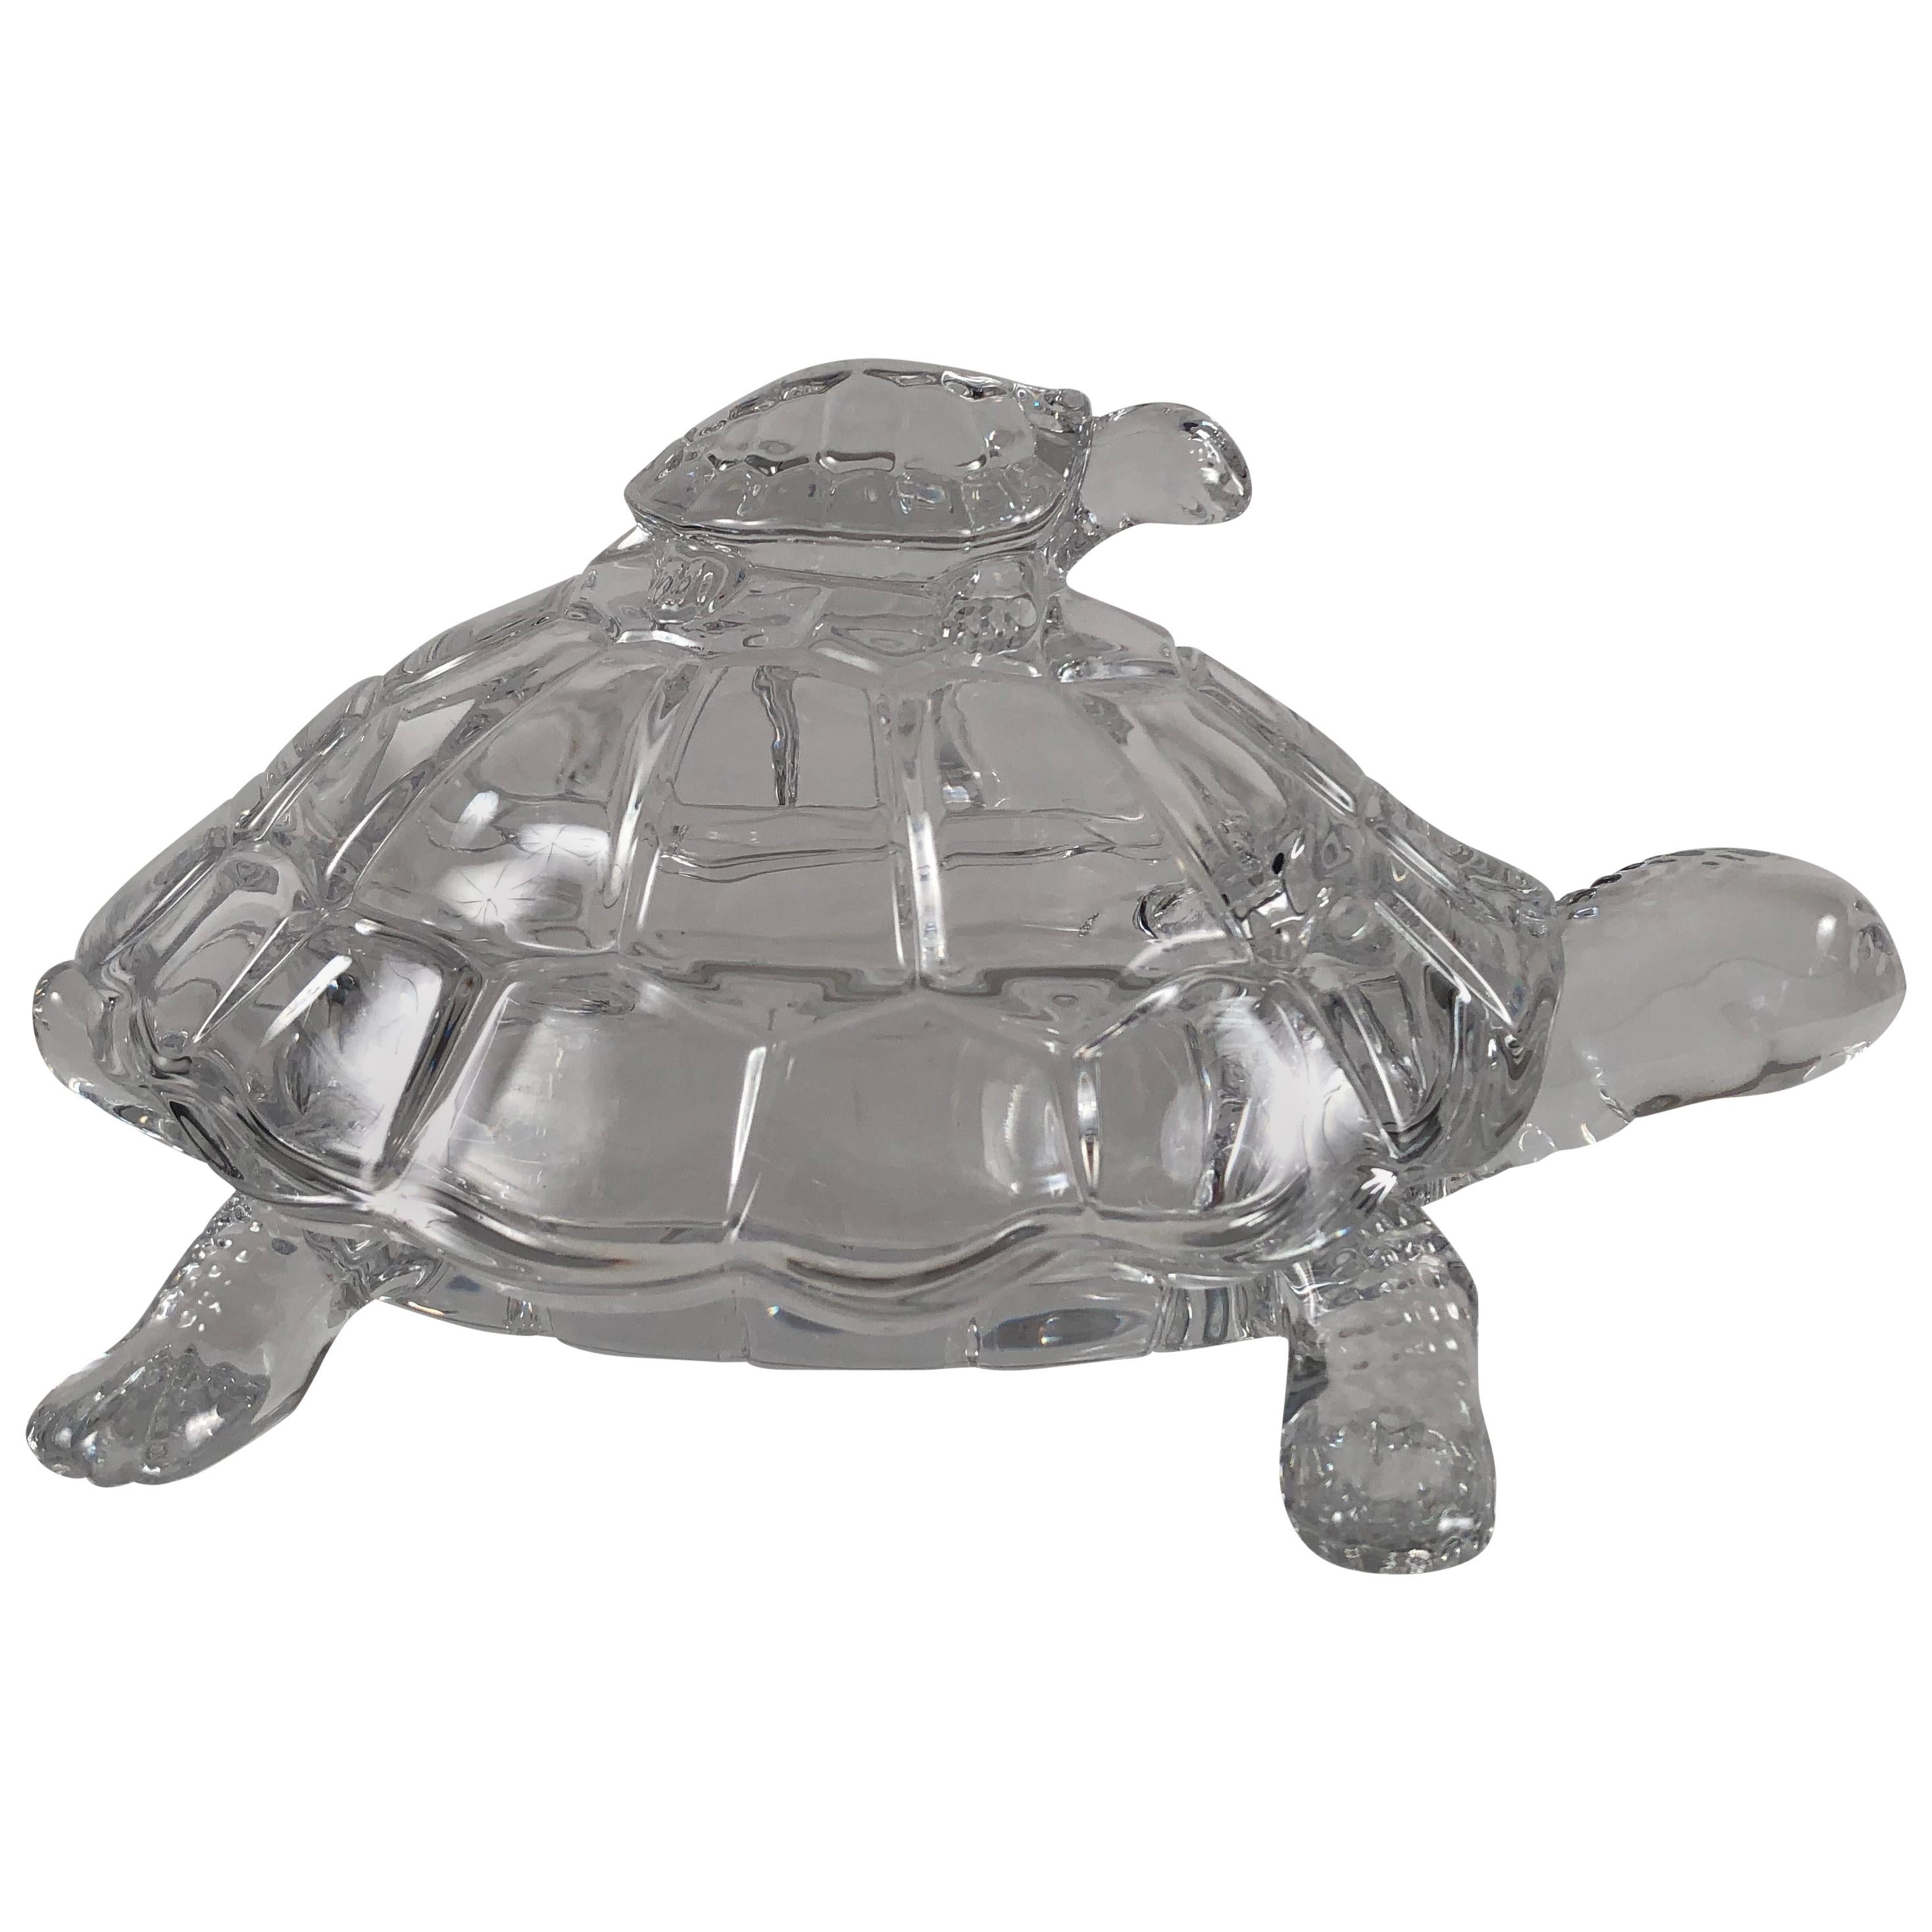 Glass Turtle Form Covered Candy or Nut Dish